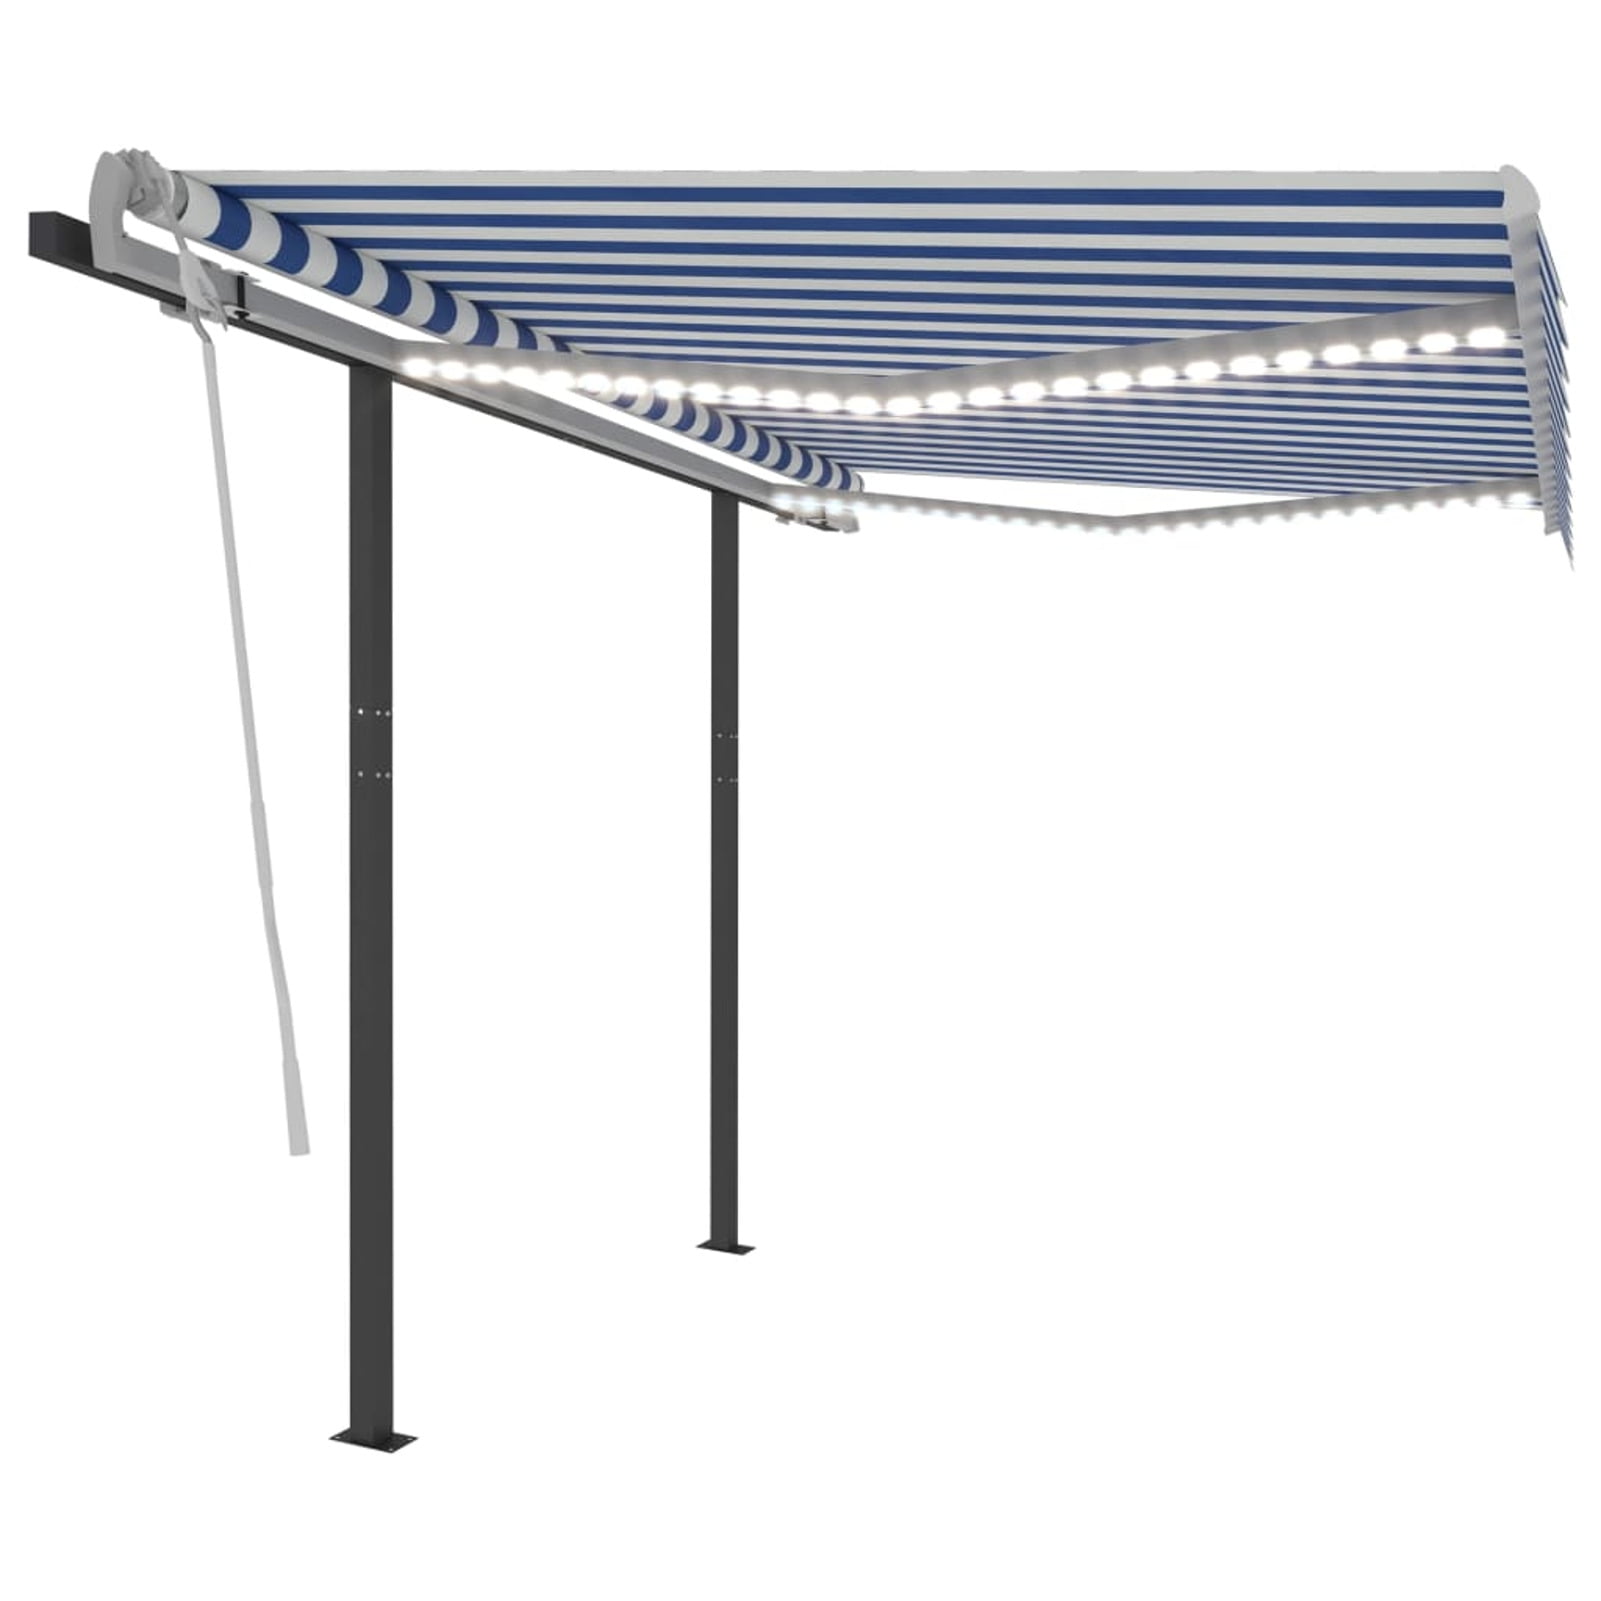 Details about   Manual Awning Canopy Garden Patio Sun Shade Shelter Aluminium Steel Retractable 